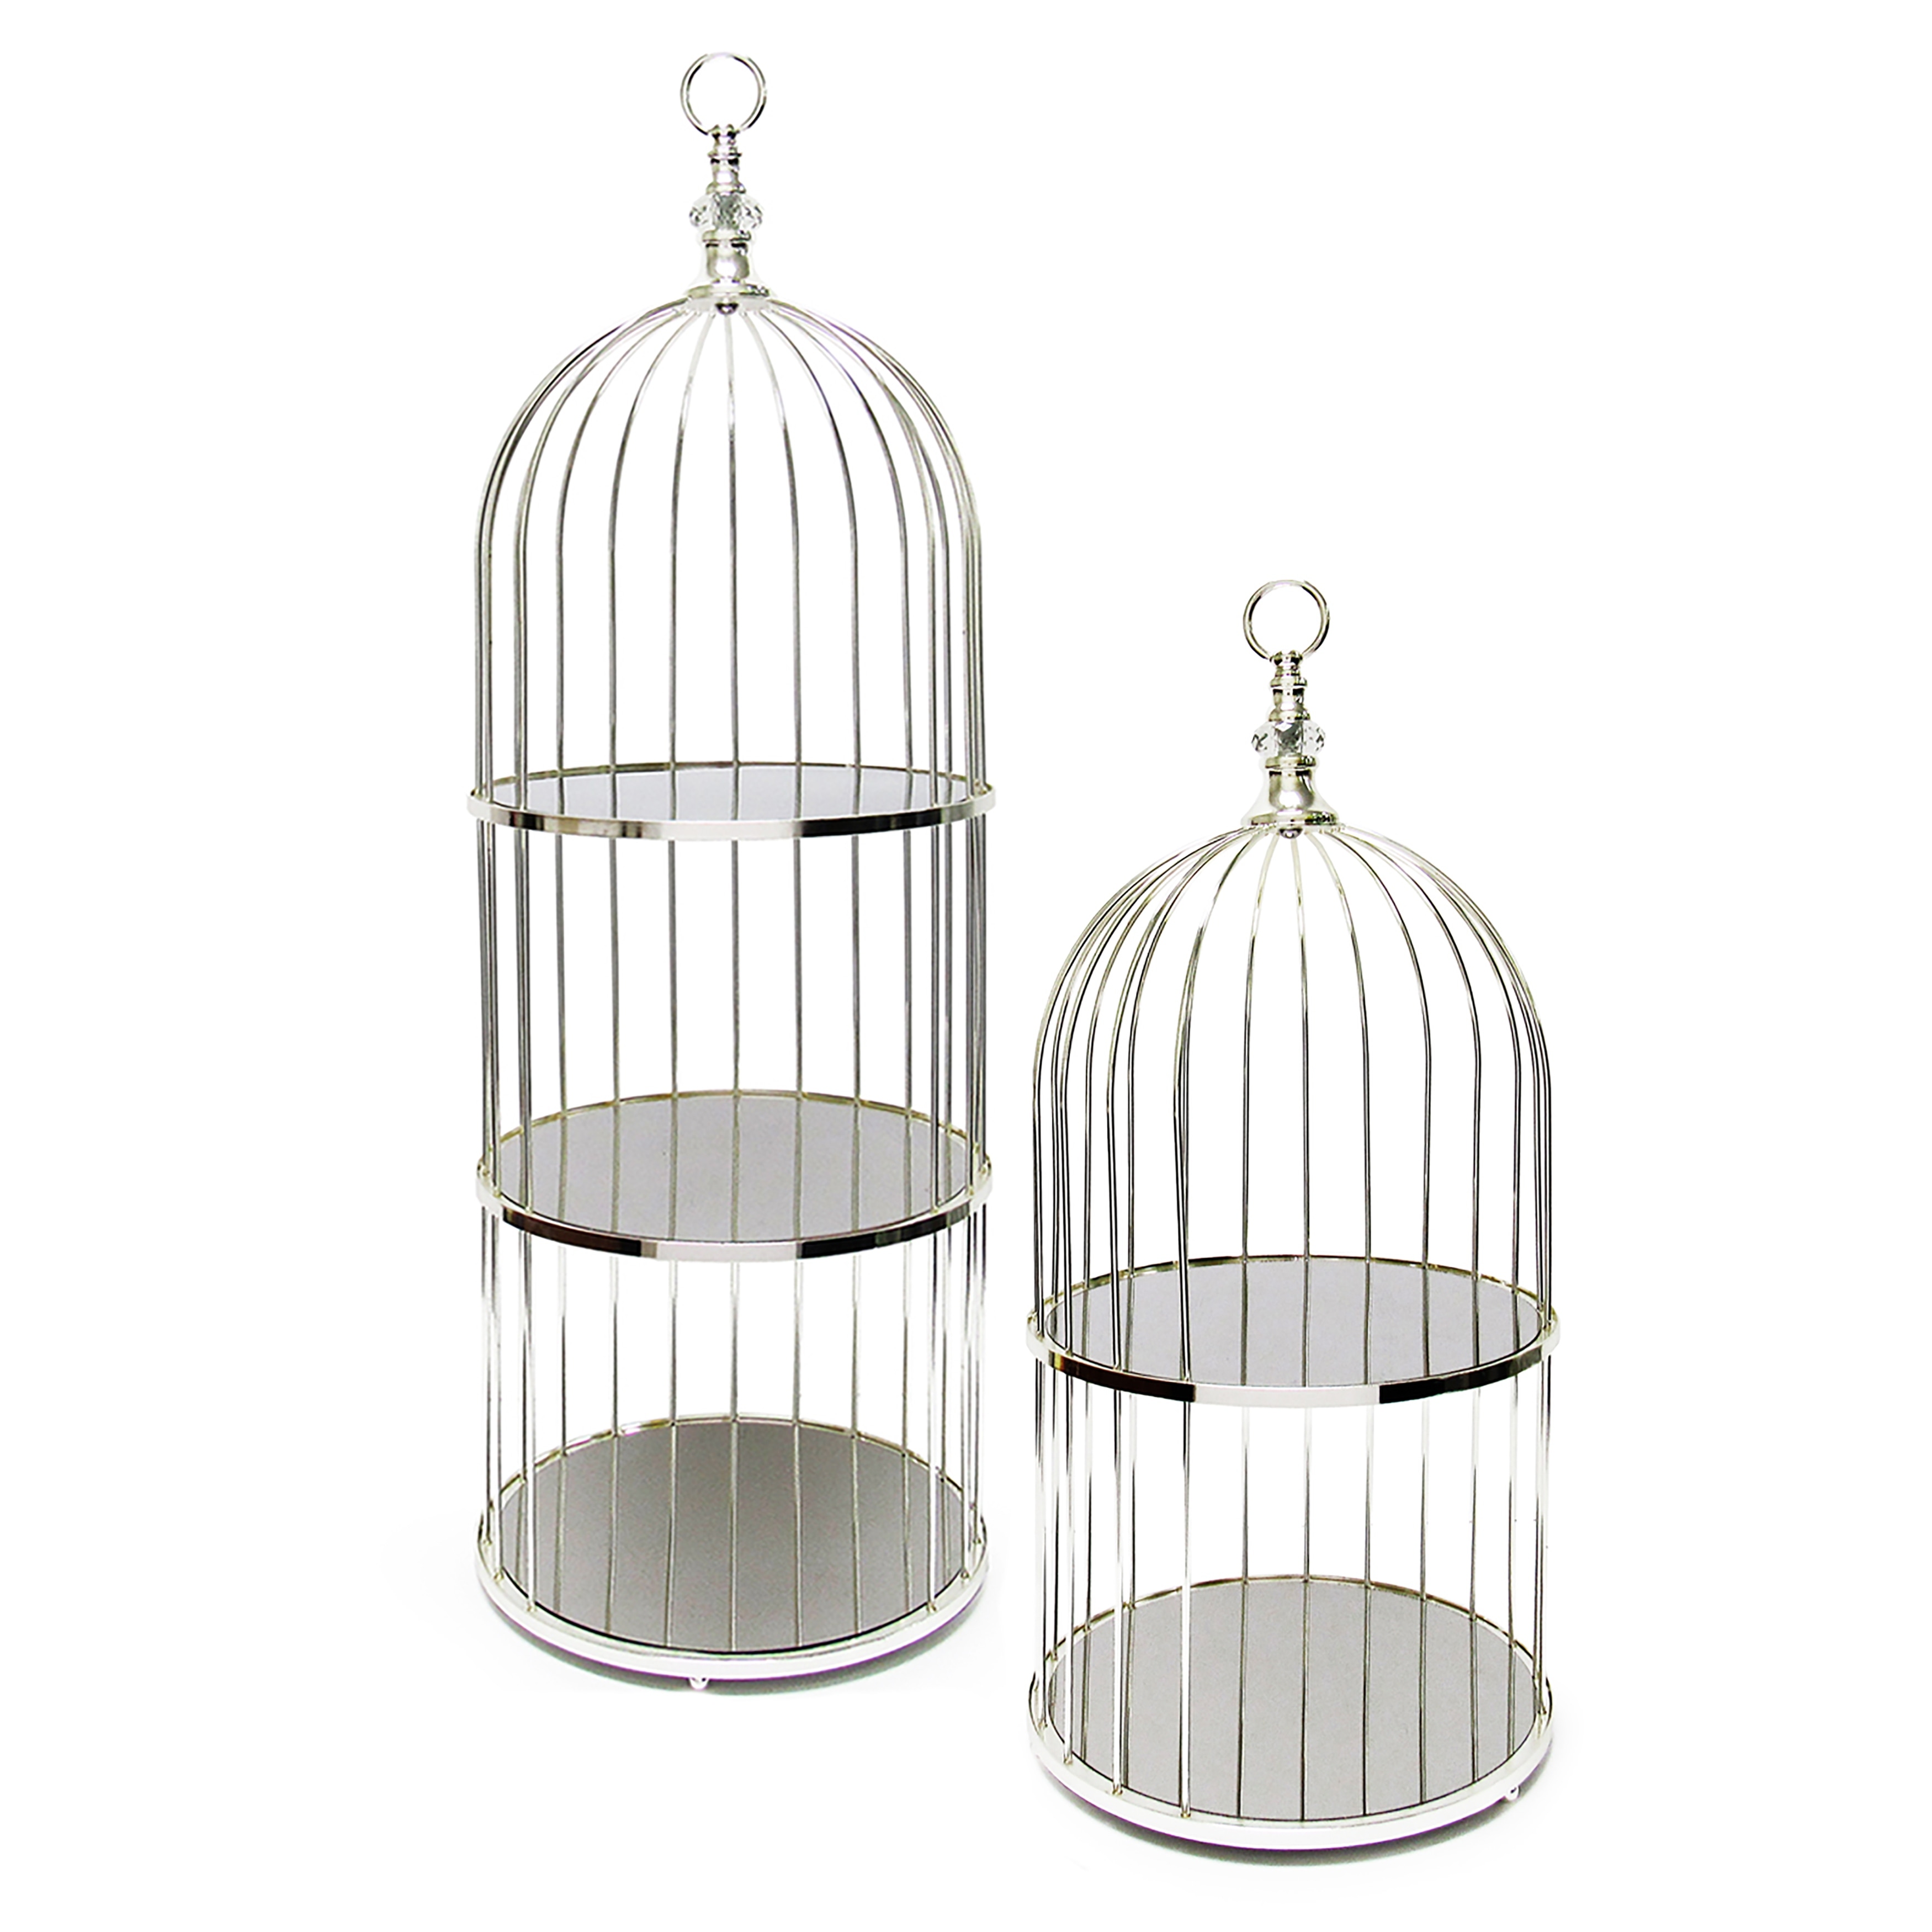 12 WEDDING QUINCEANERA FAVORS SMALL WHITE METAL BIRD CAGES PARTY DECORATIONS 